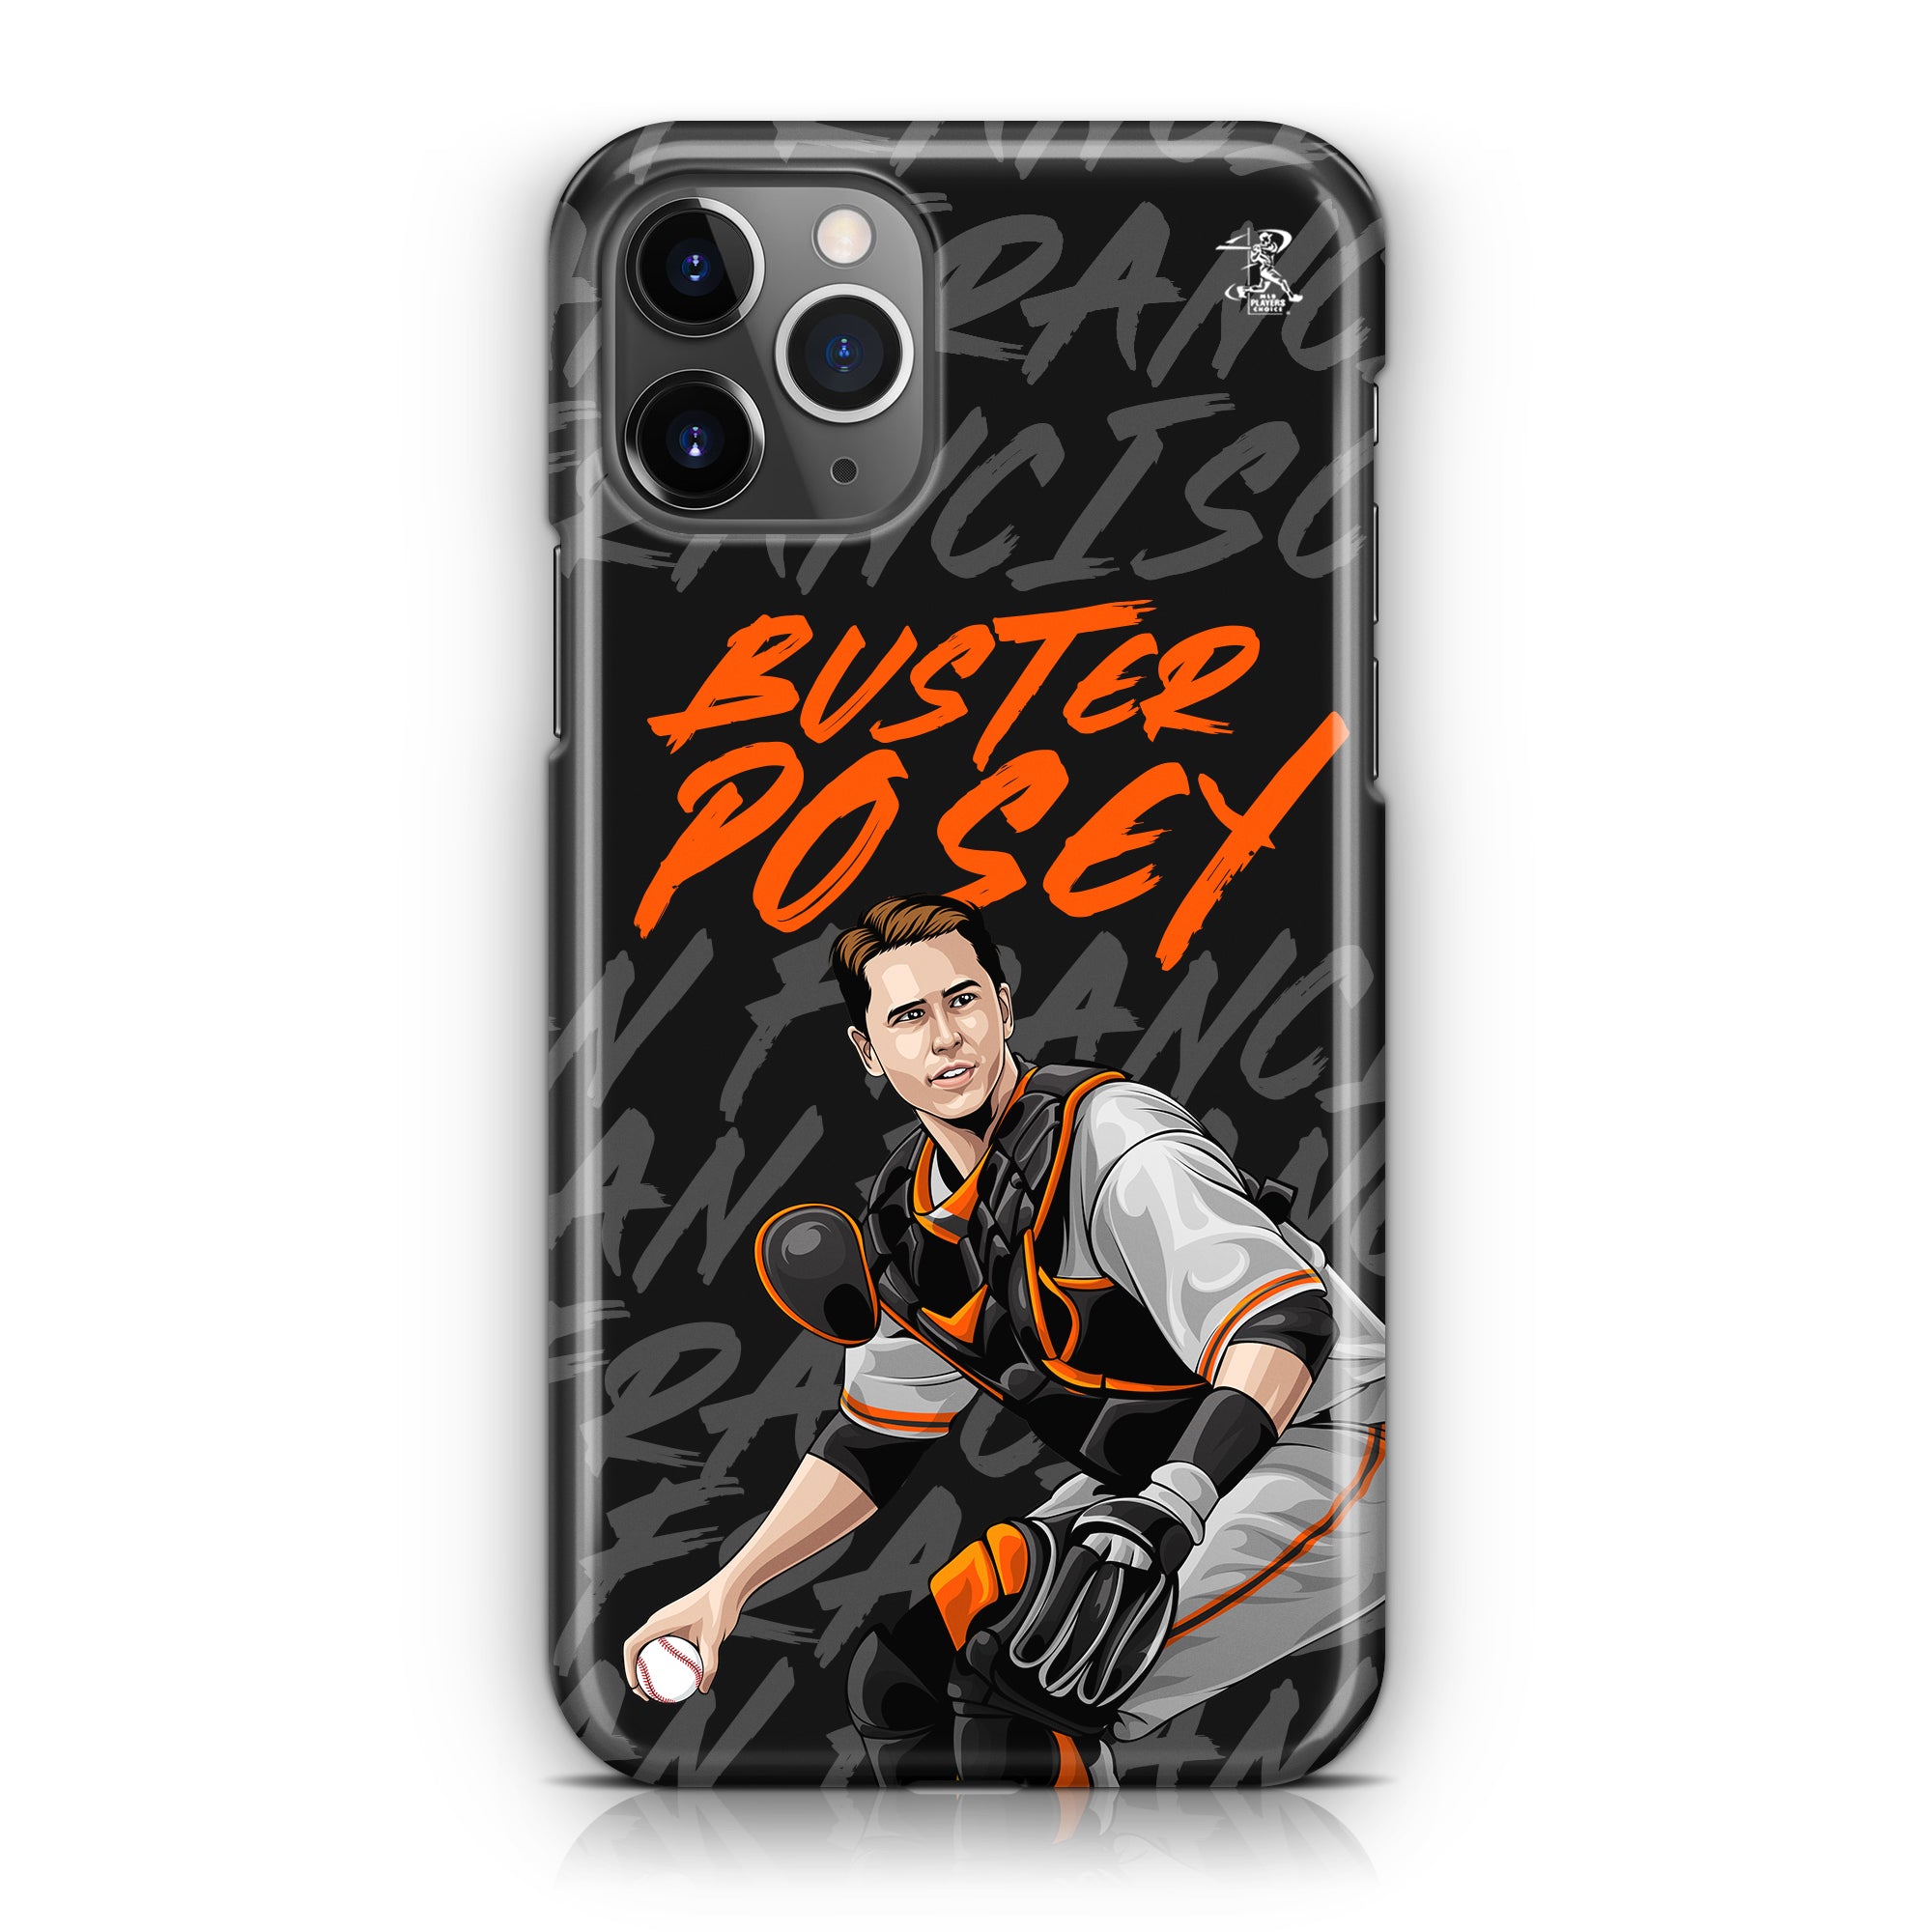 Posey Star Series 2.0 Case